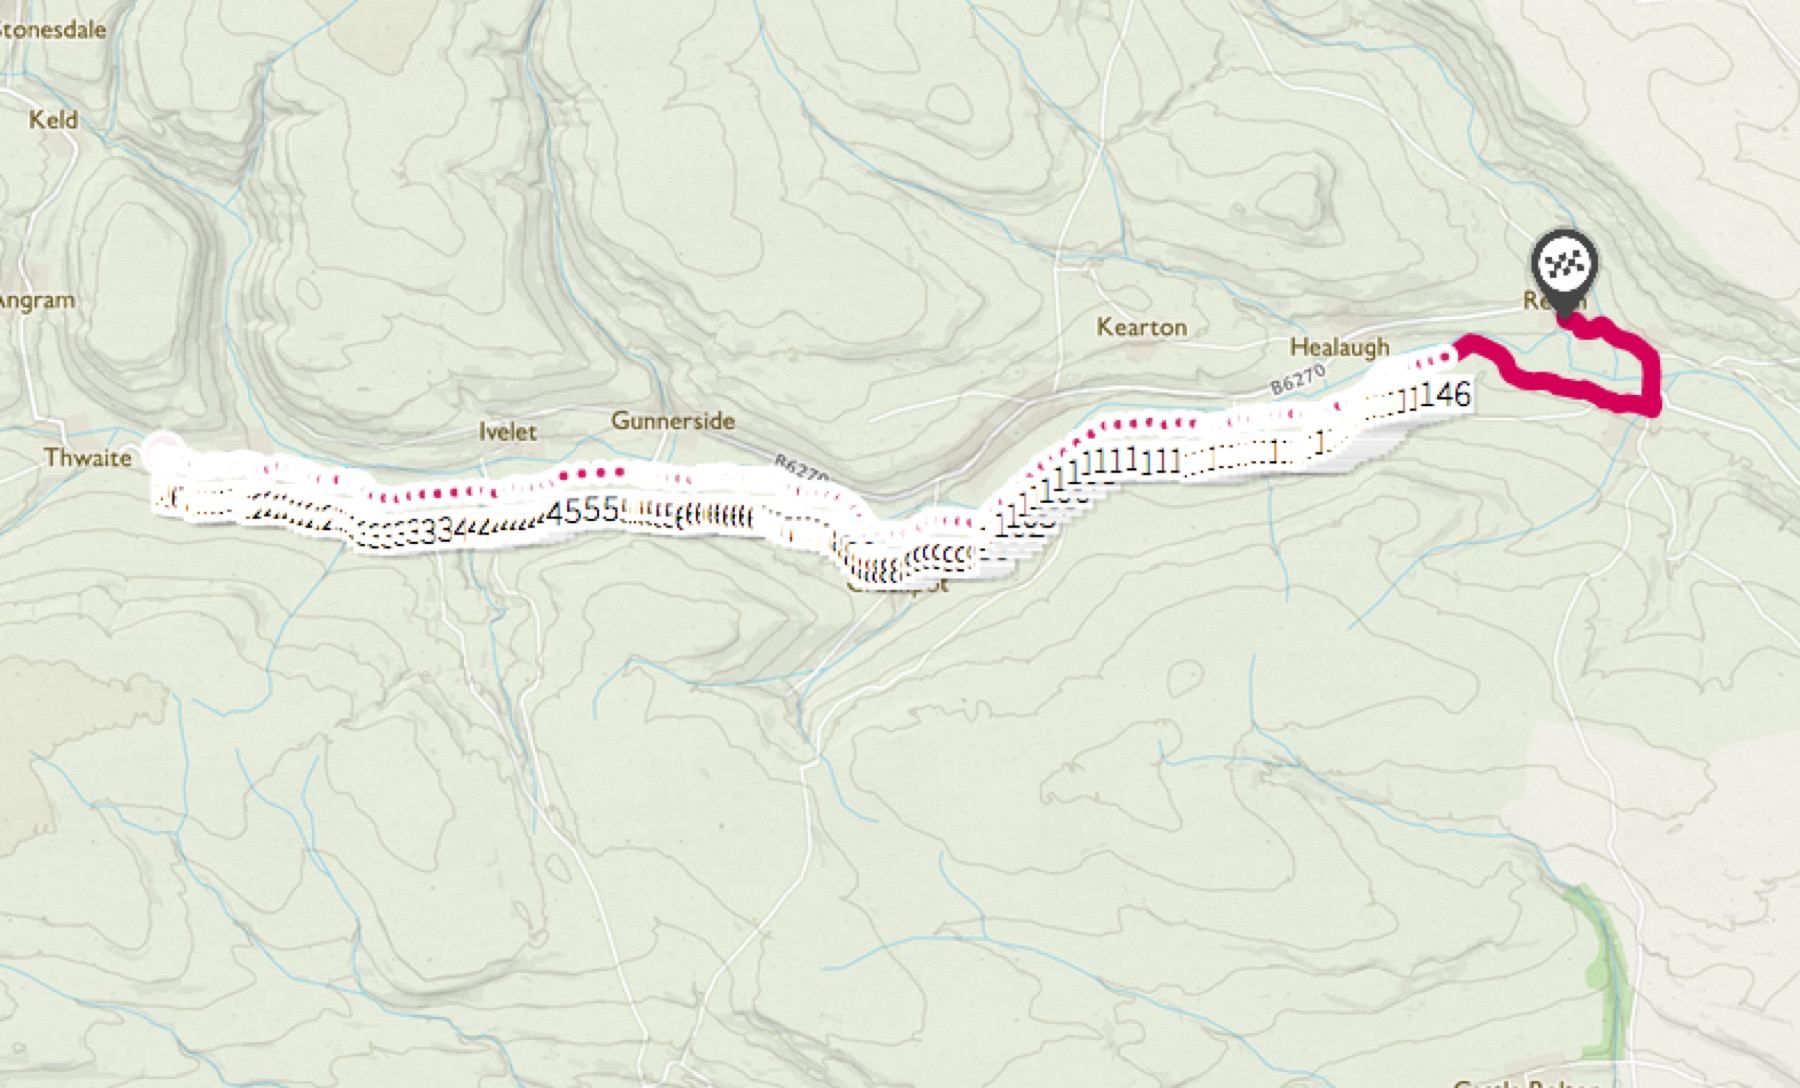 Usha Gap Campsite to Reeth along the Swale Trail Route Map